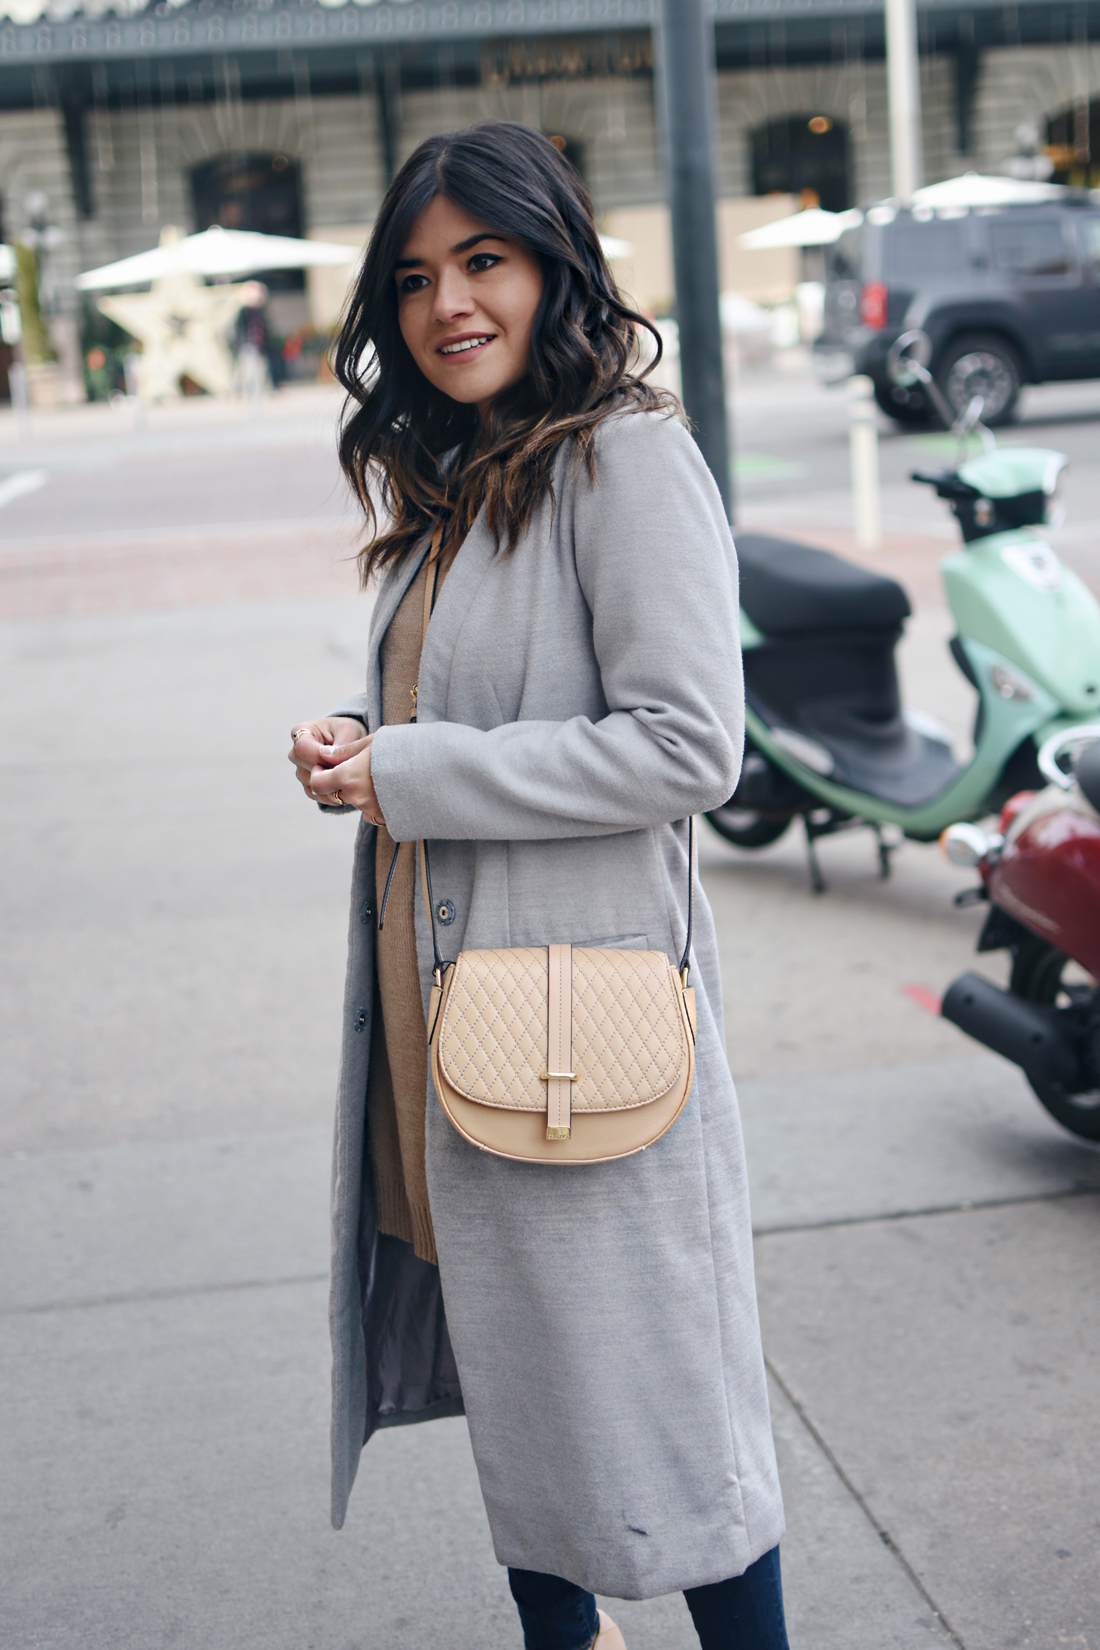 Carolina Hellal of Chic Talk wearing a Shein gray long coat, Paige skinny jeans, Calvin Klein bag, NA-KD sweater, and Sam Edelman Shoes.